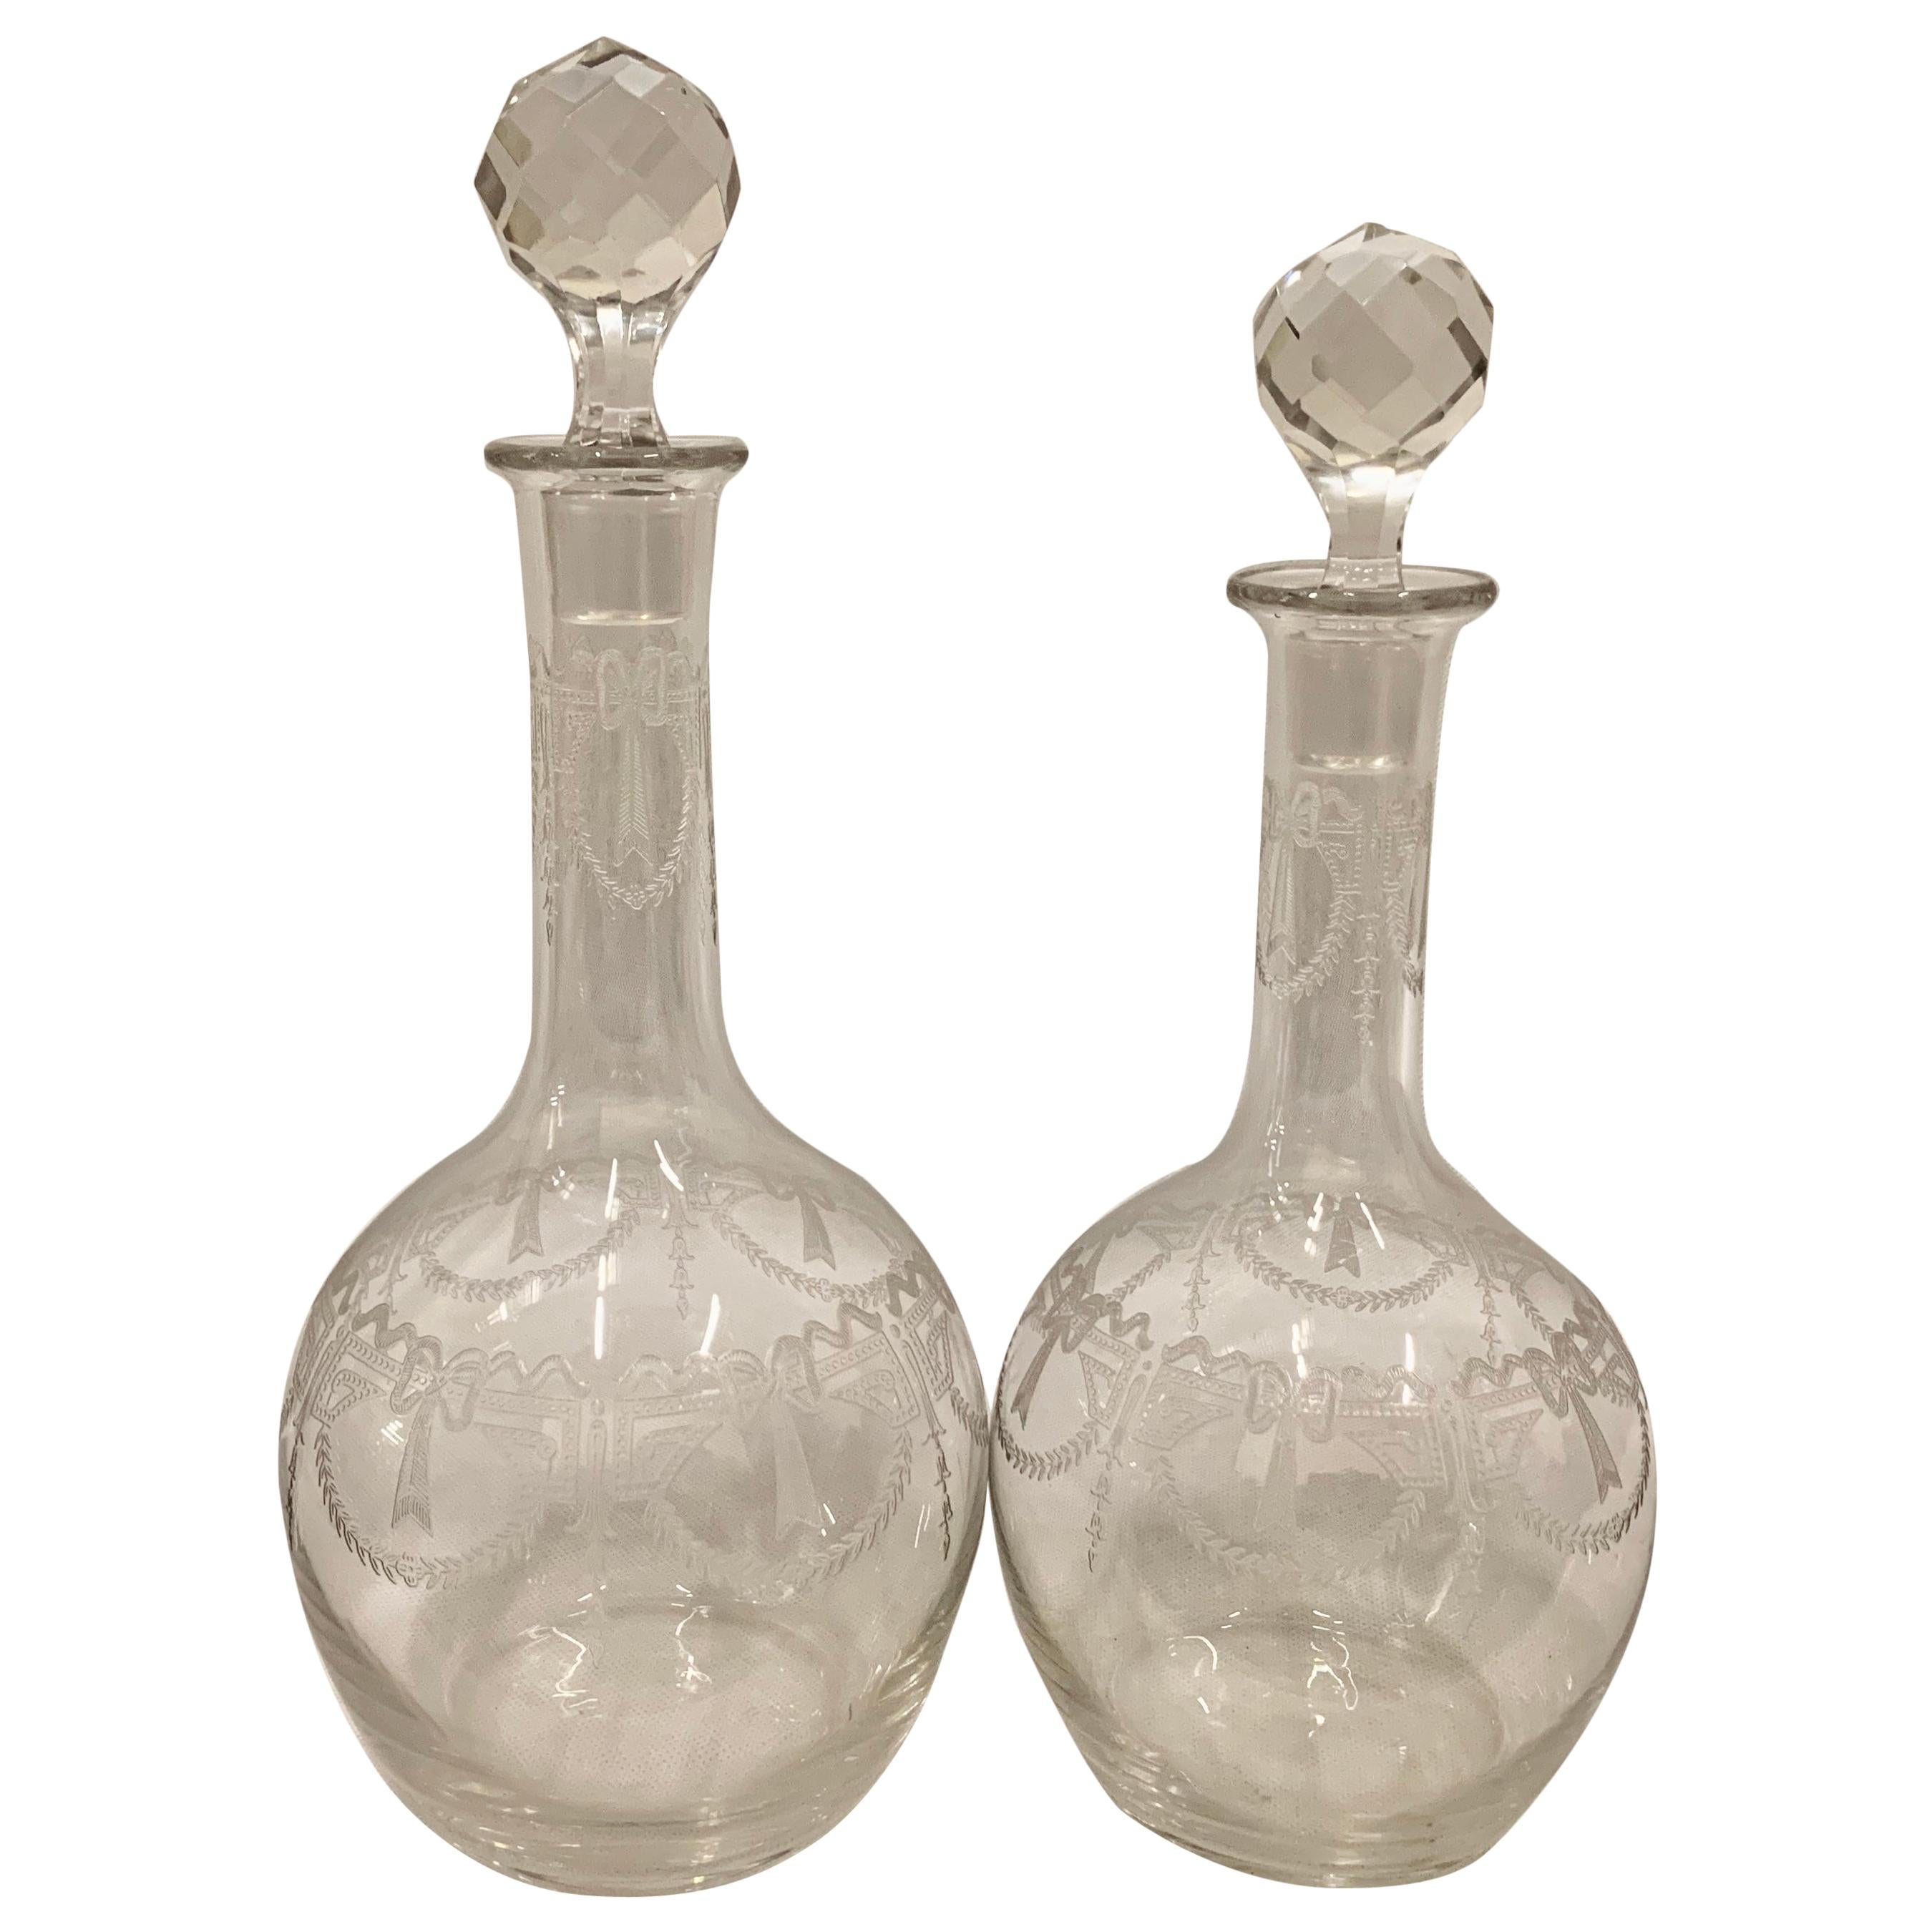 Set of Two French Crystal Decanters with Engraved Bodies and Faceted Stoppers